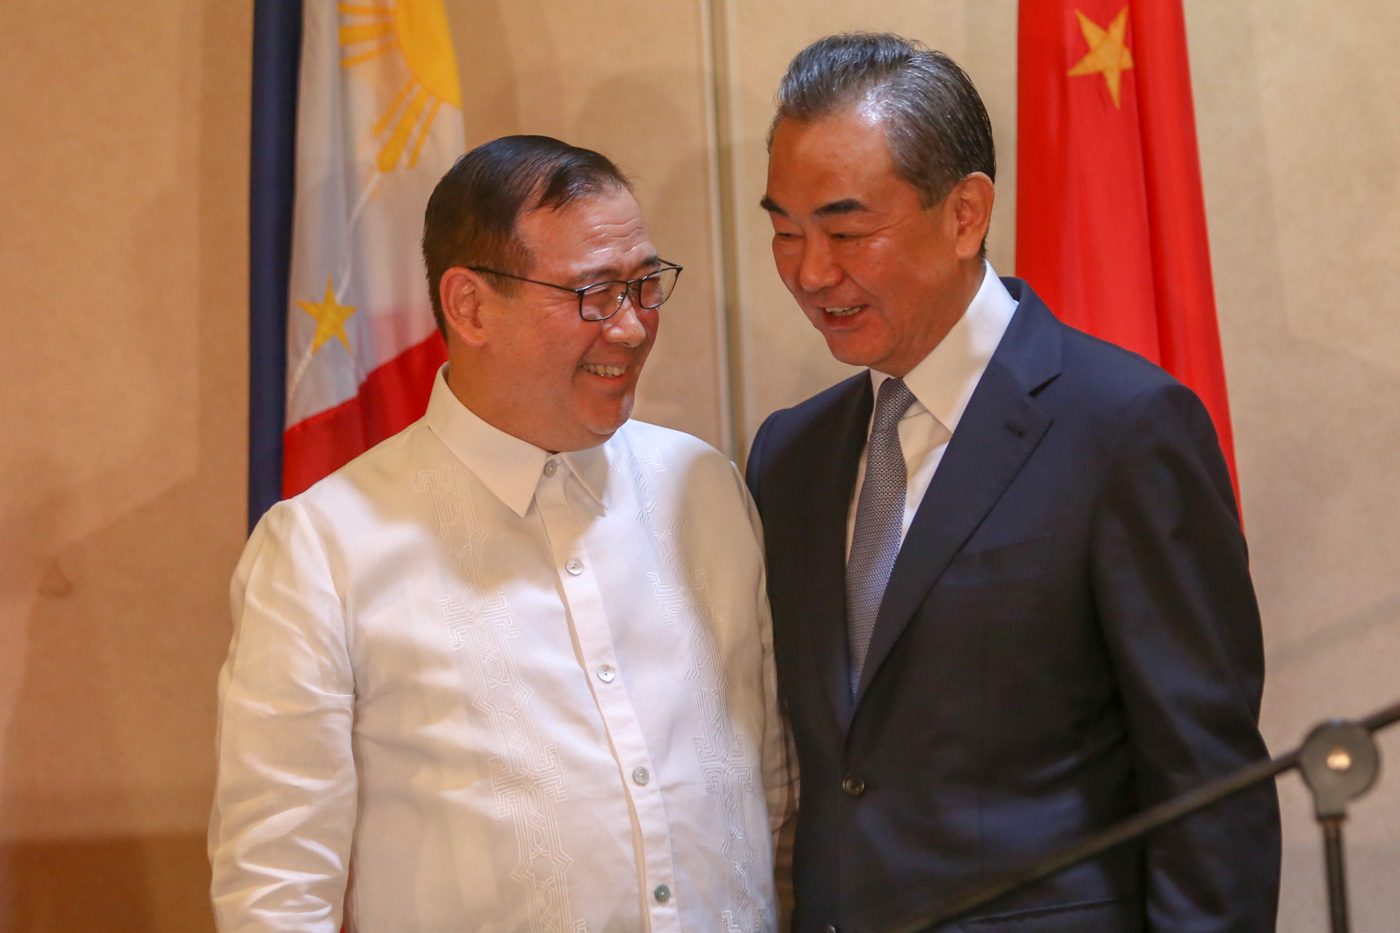 Locsin bares parts of Philippines’ oil deal with China